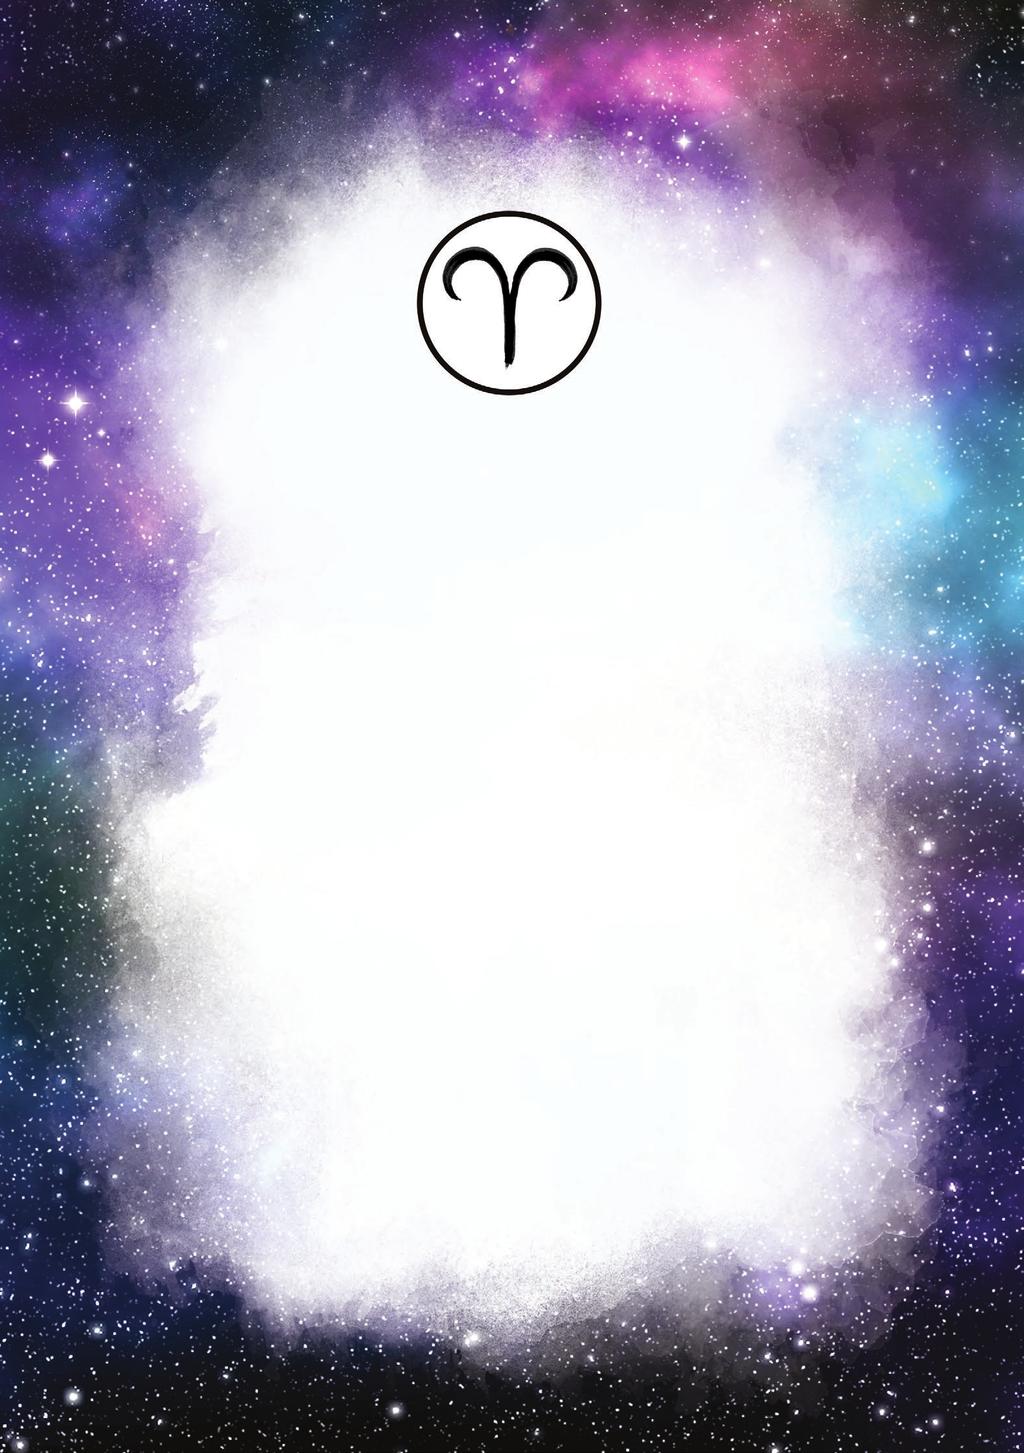 Traits of a r i e s Congratulations! Your birth not only granted you life, but a star sign that has aligned itself with you. You! Whether you like it or not, study it or scoff, the ram of Aries is YOUR star sign.